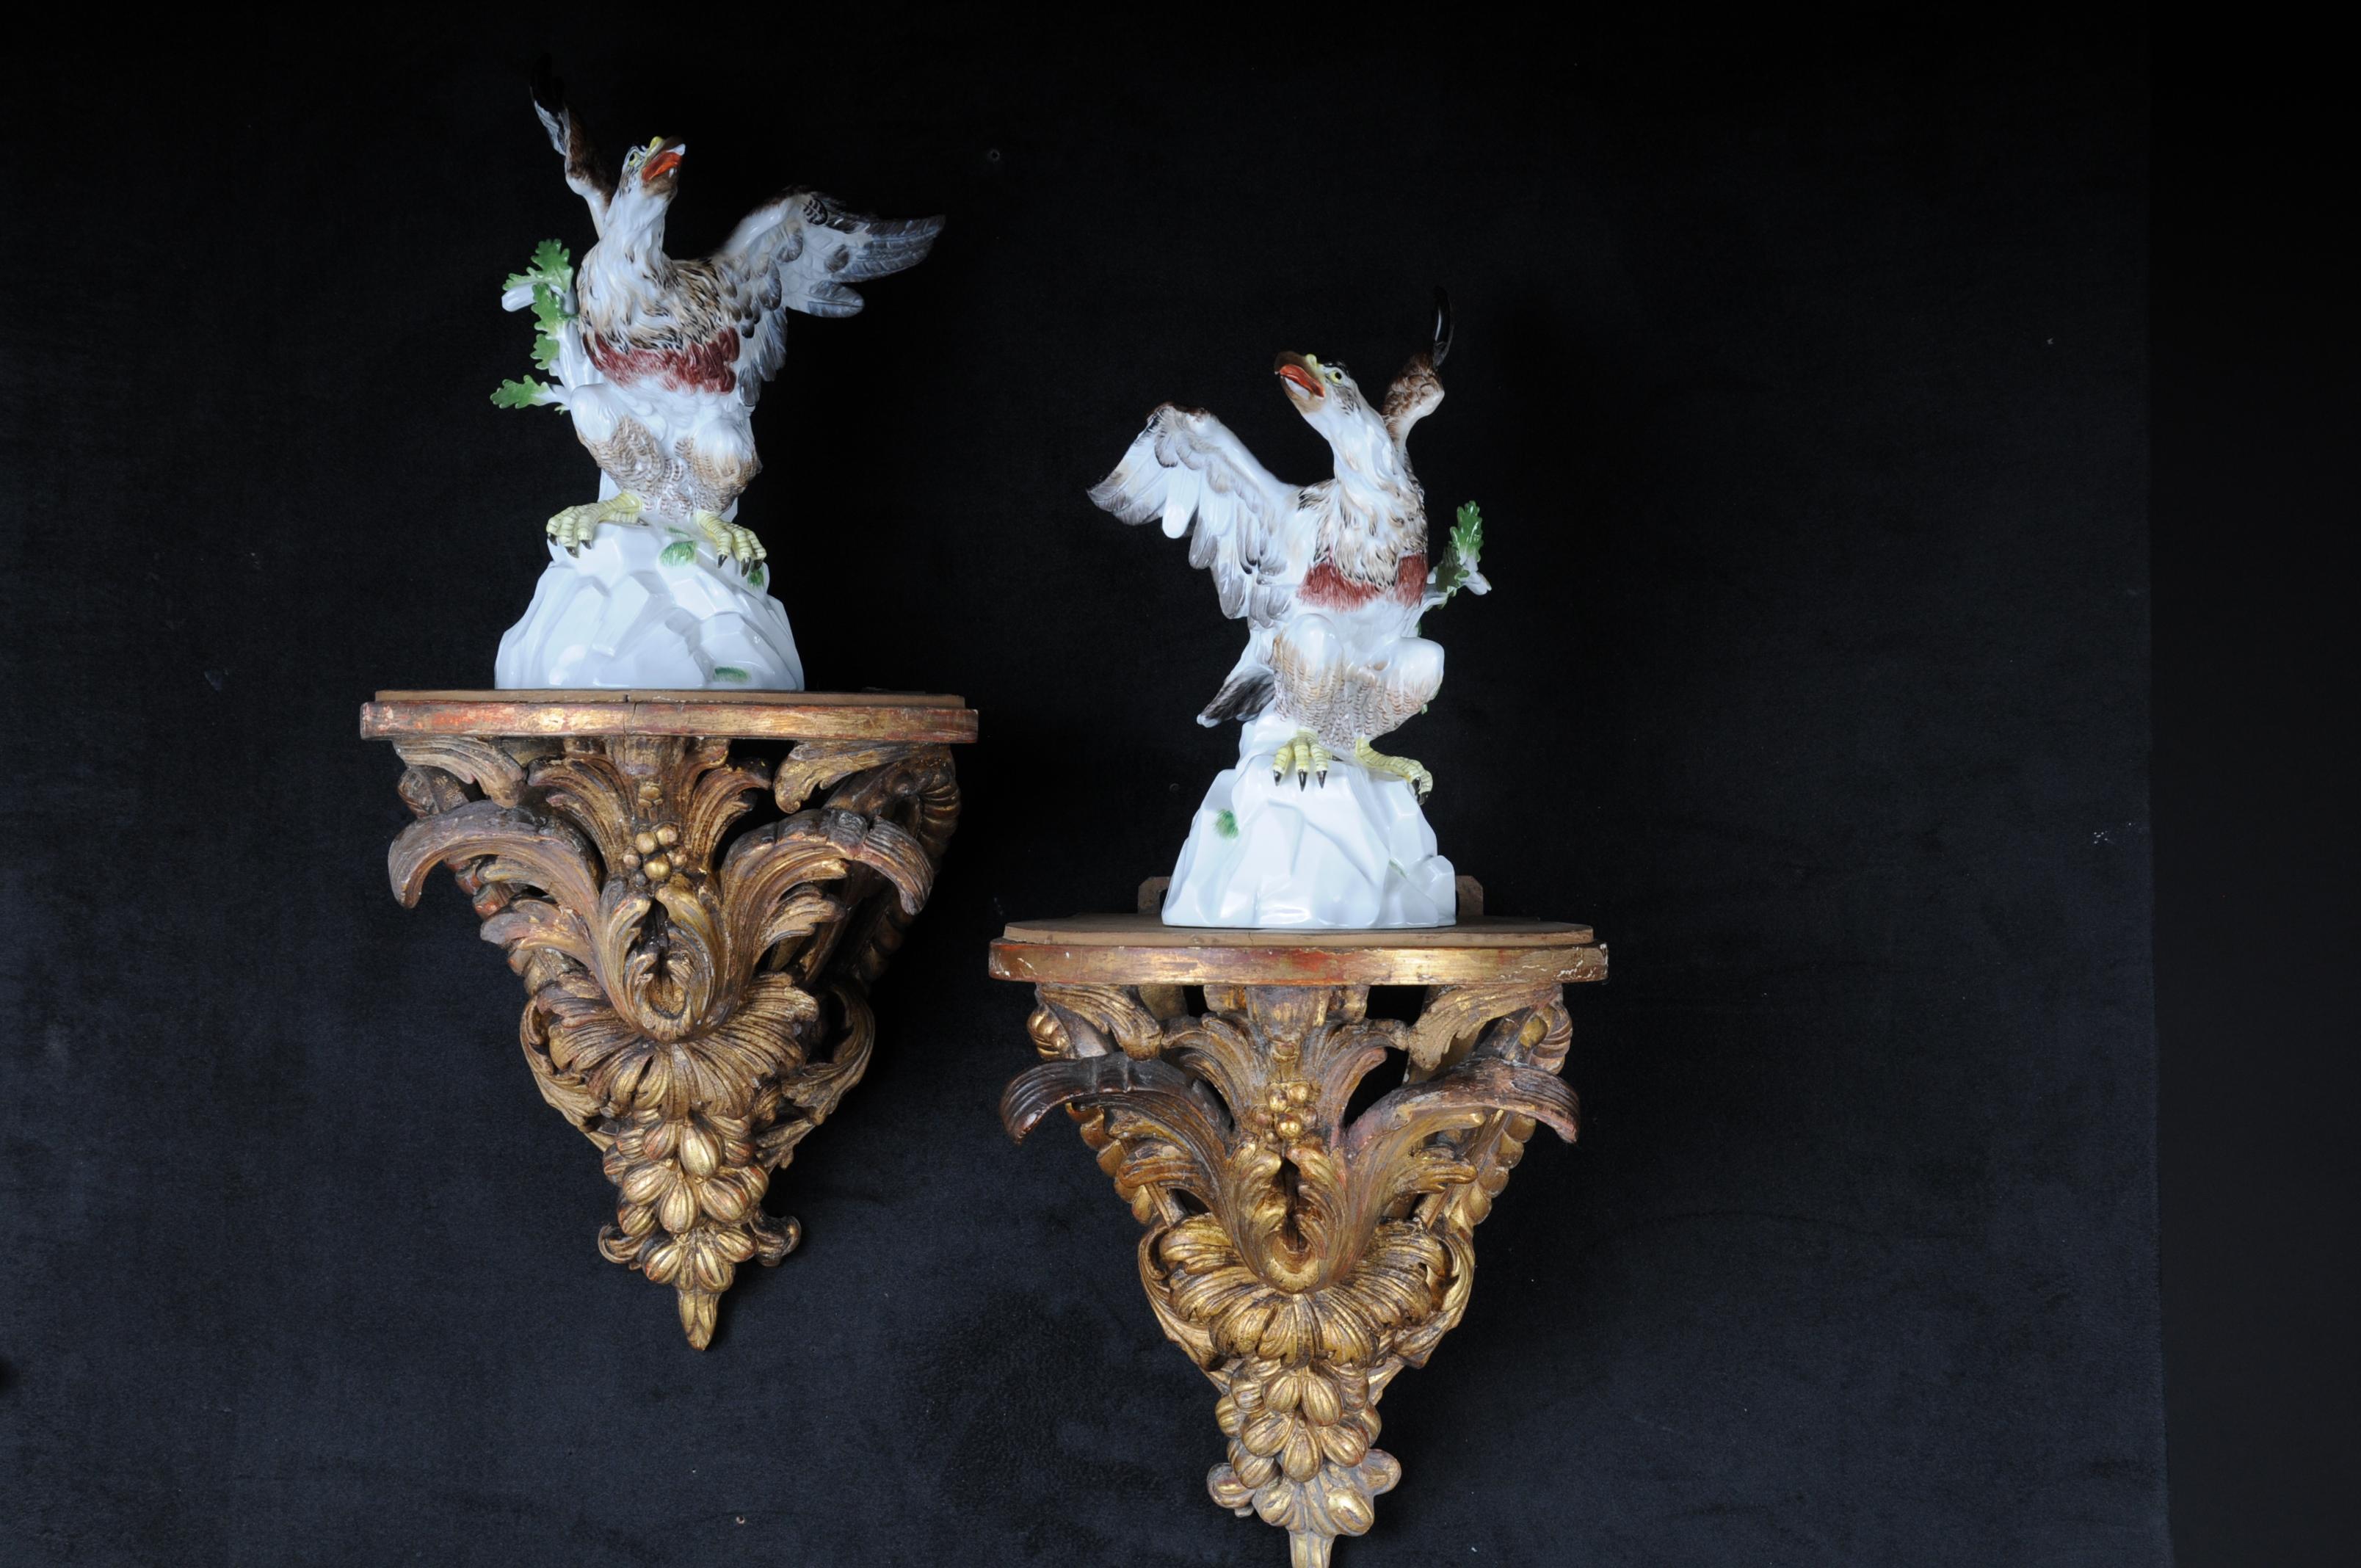 19th century pair of Baroque wall brackets, circa 1870
Massive wooden carcass with gilded stucco elements circa 1870.
Richly carved wall brackets. This historic wall console set in floral blooms offer 2 shelves in a stylish character.
The shapely